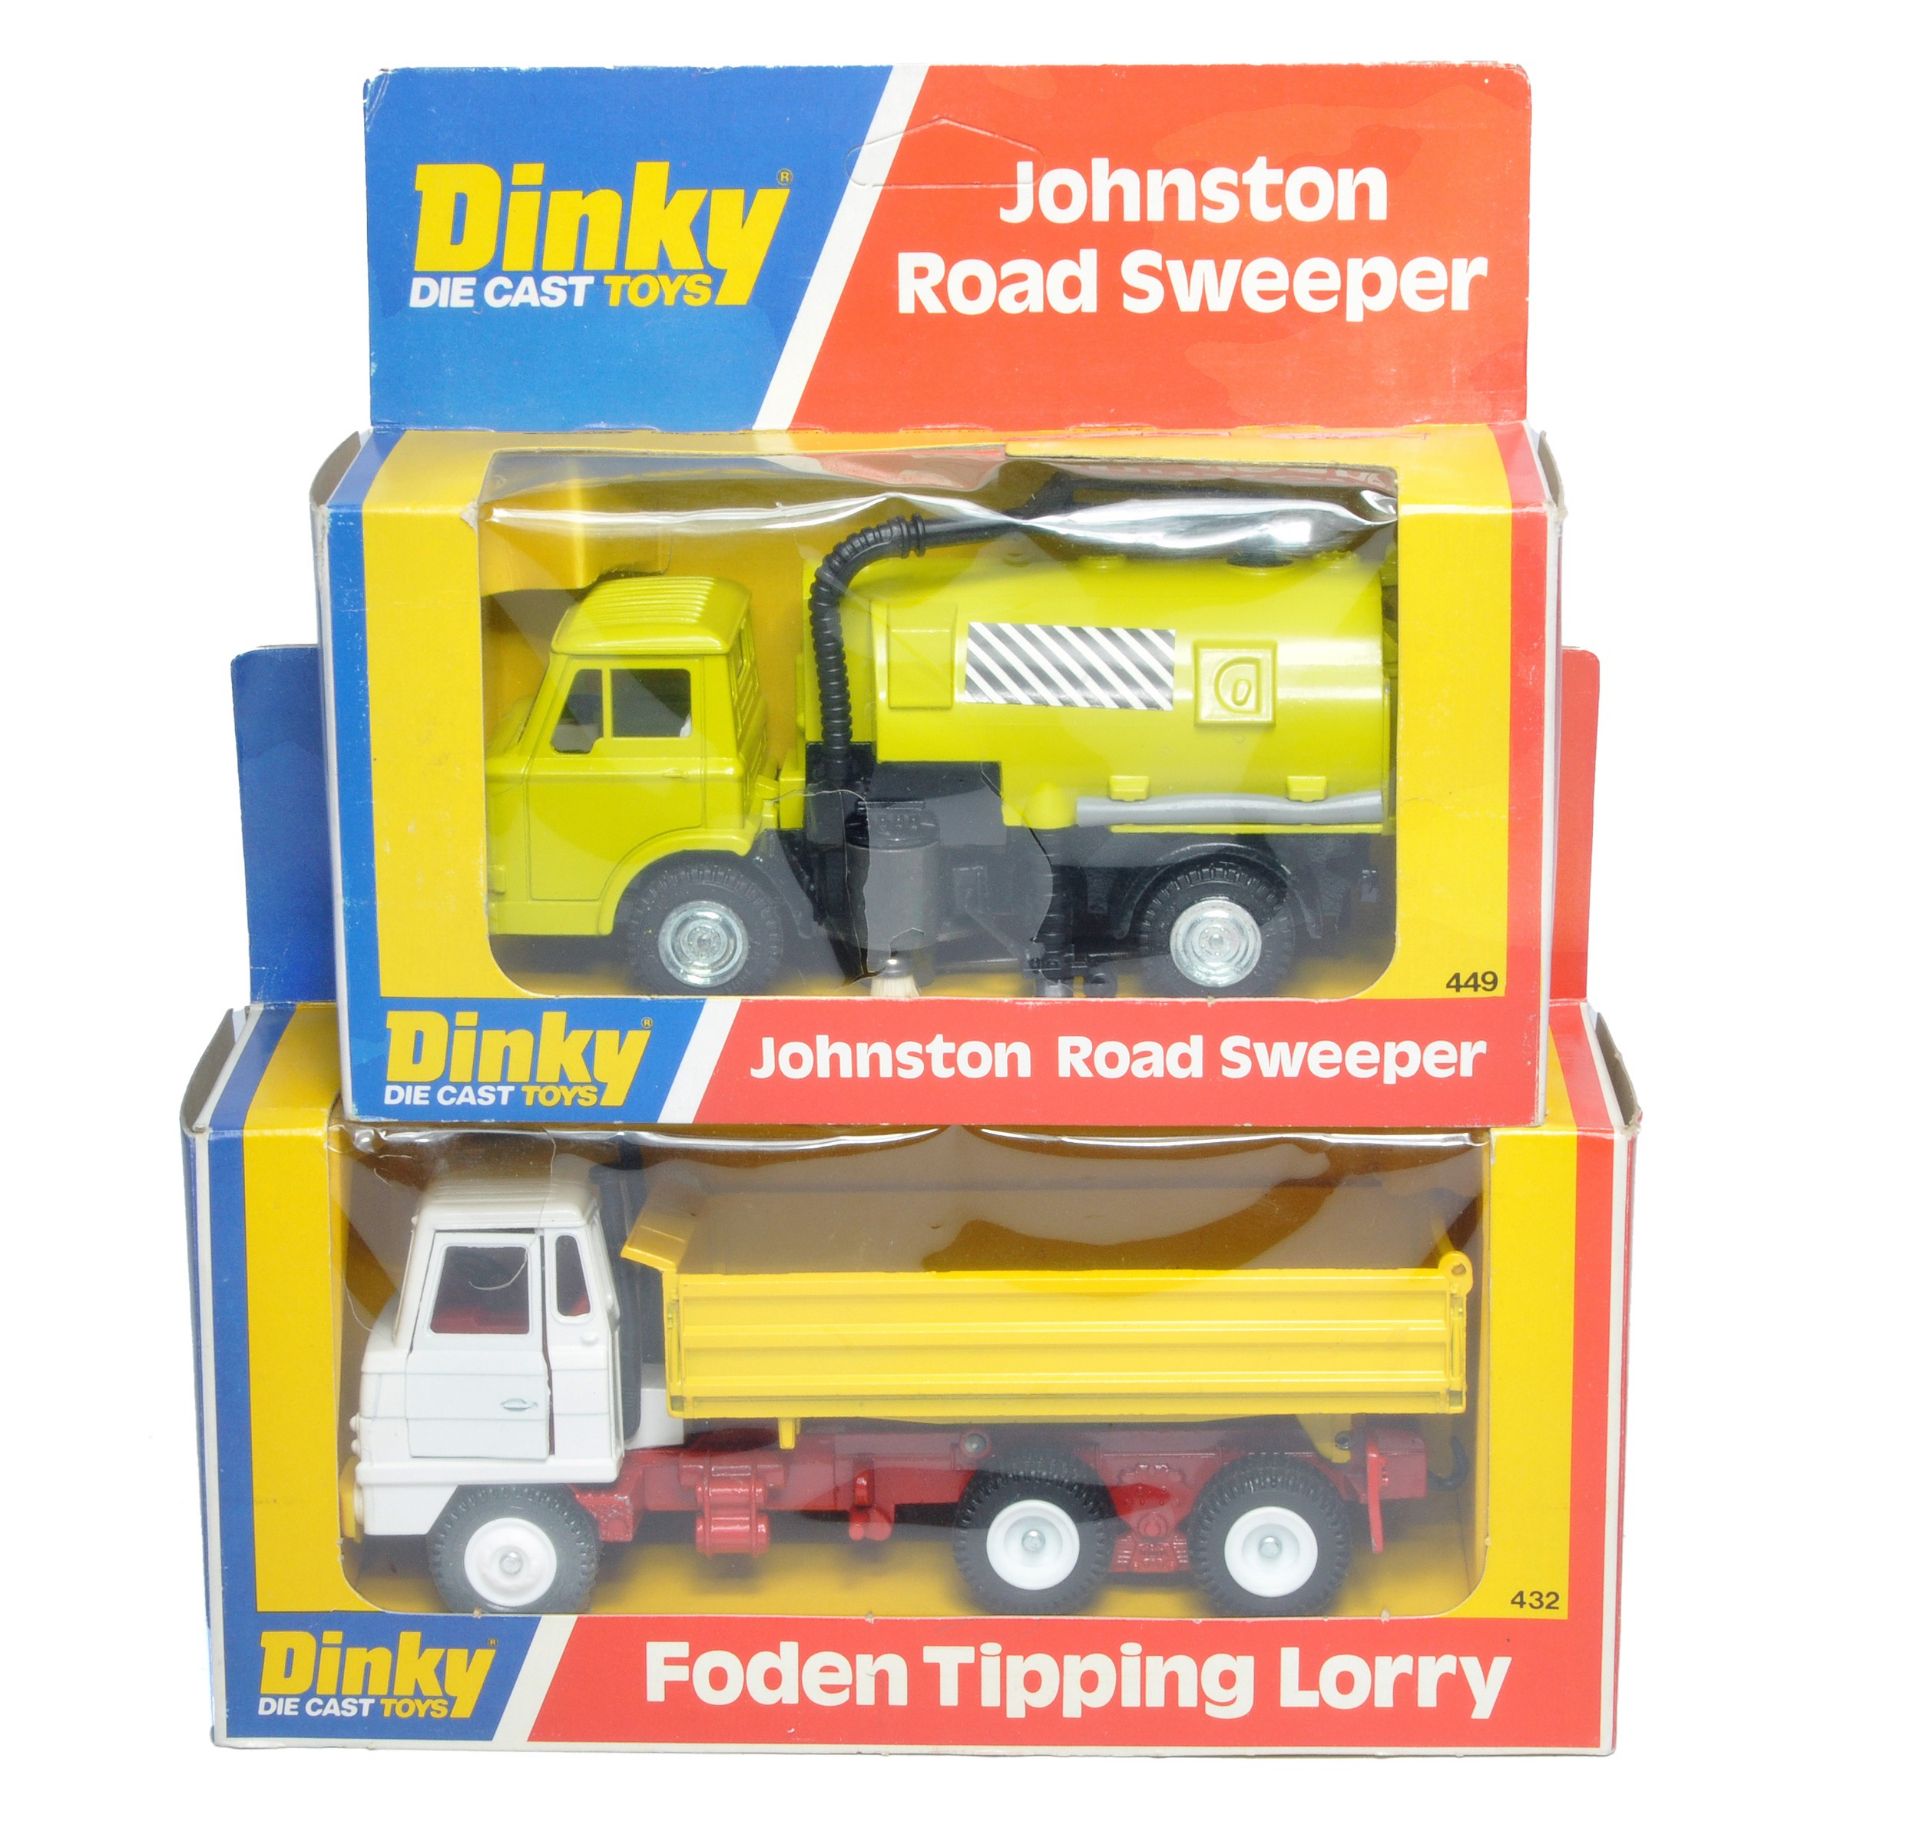 Dinky duo comprising No. 449 Johnston Road Sweeper and No. 432 Foden Tipping Lorry. Both look to